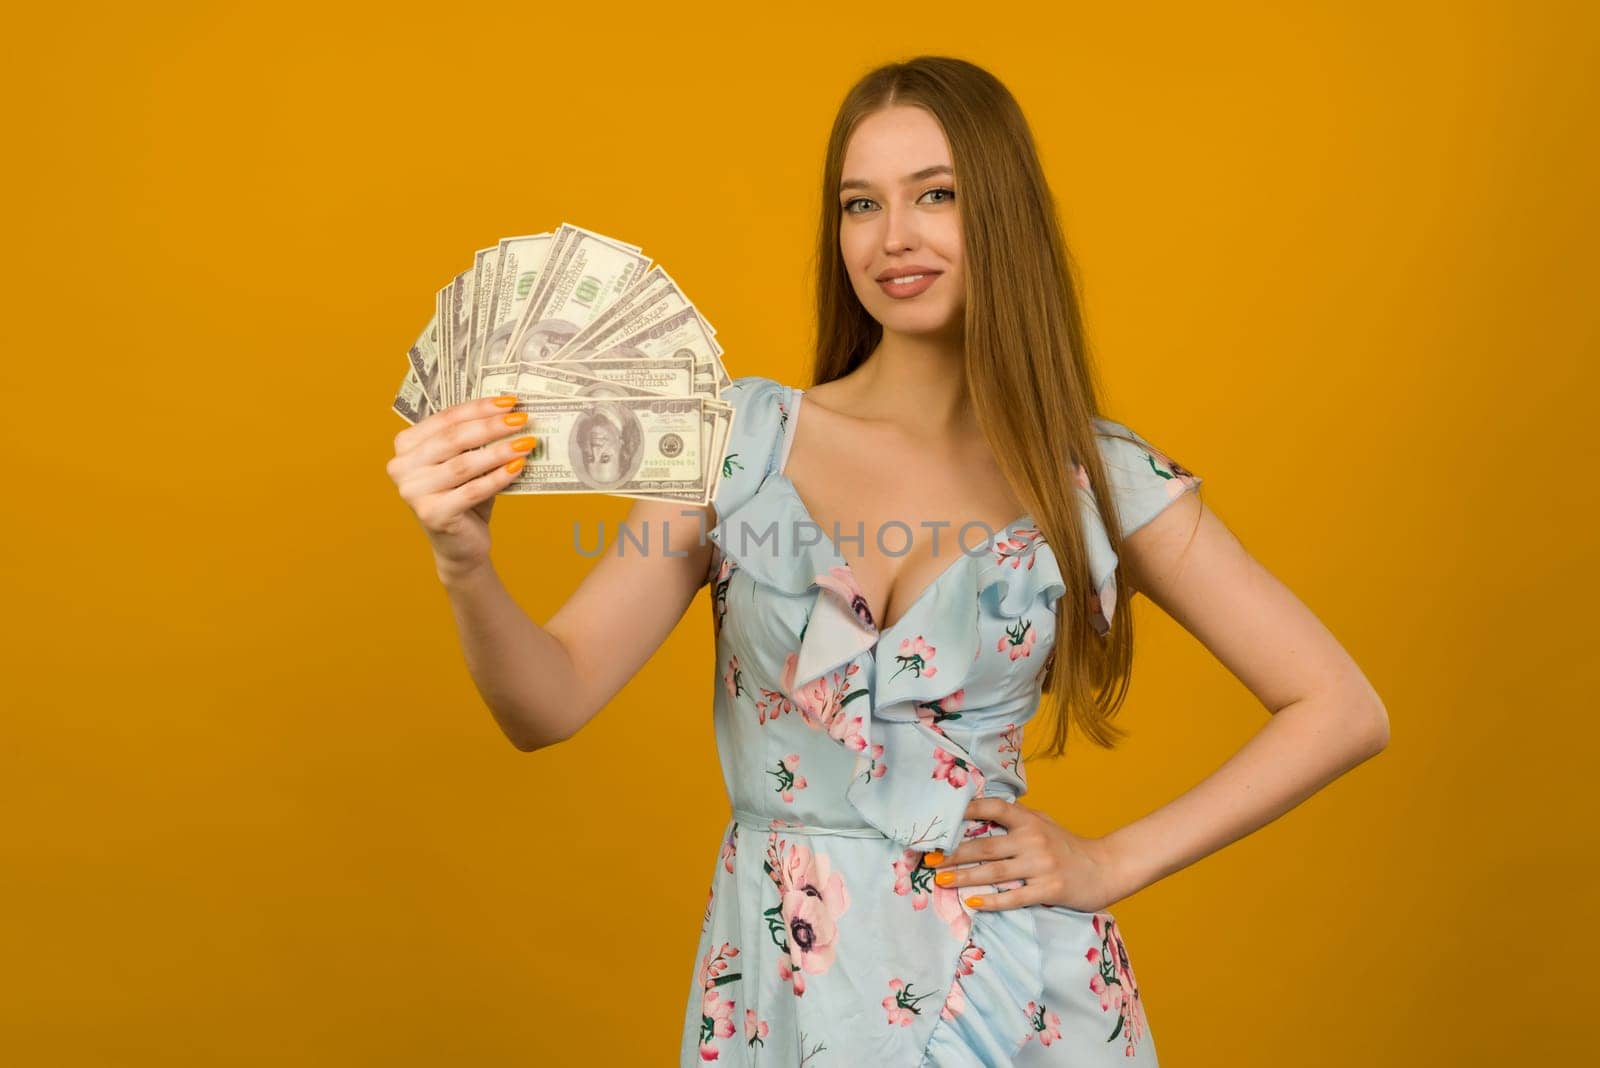 Joyful girl won the lottery and holds a fan of US dollars in her hands on a yellow background - image